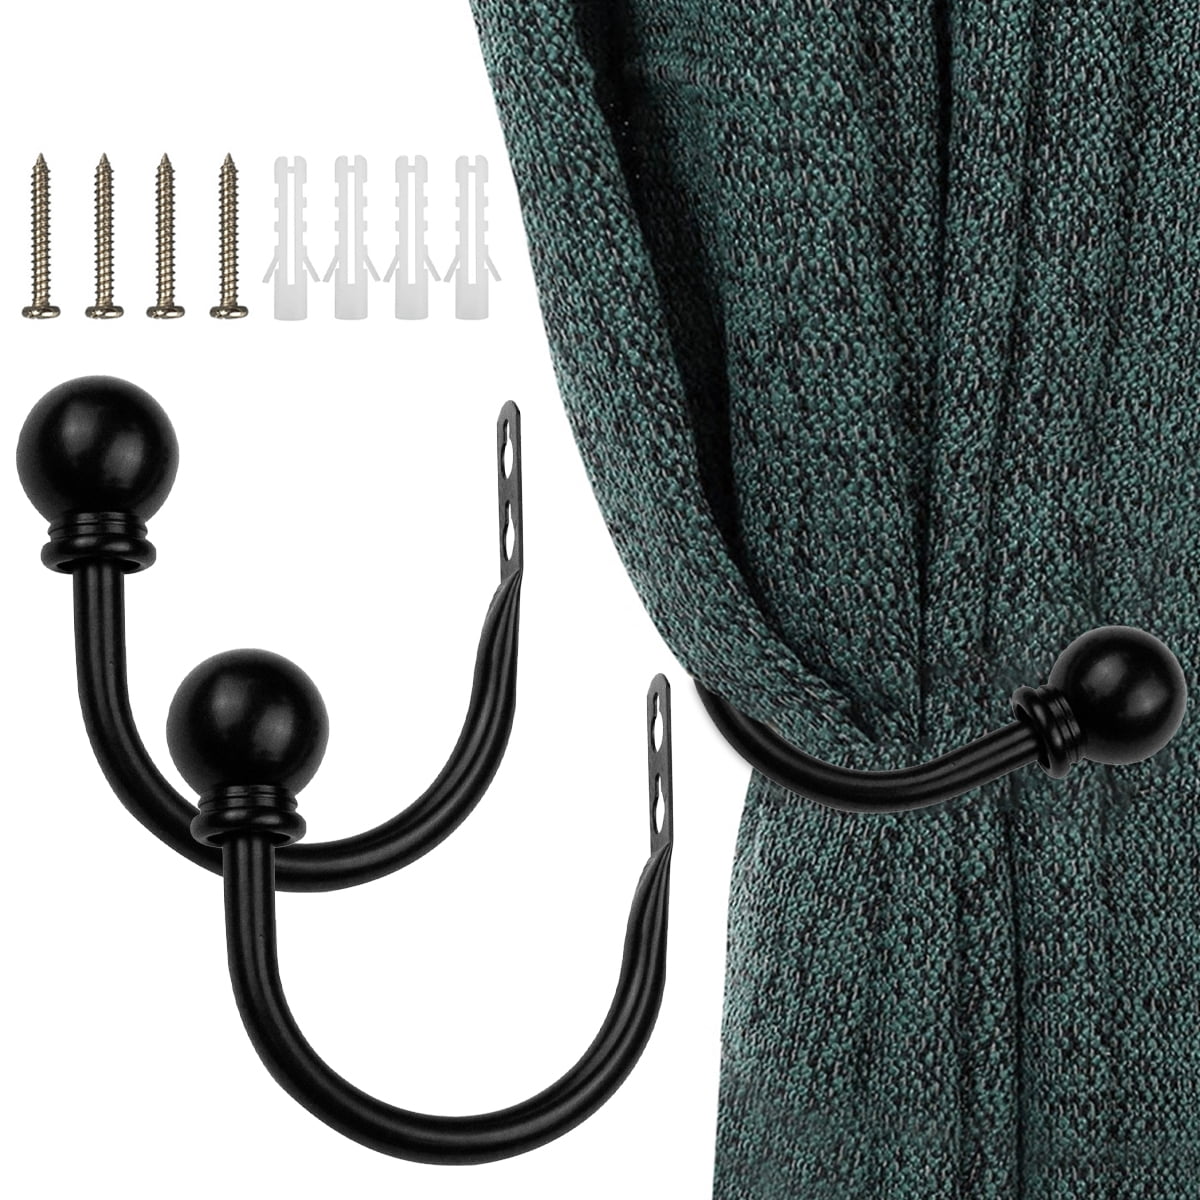 2 Pcs Curtain Holdbacks Metal Tie Backs Curtain Holders for Wall Decorative  Curtain Holdback U Shaped Curtain Hooks Holder with Screws for Home  Accessories 